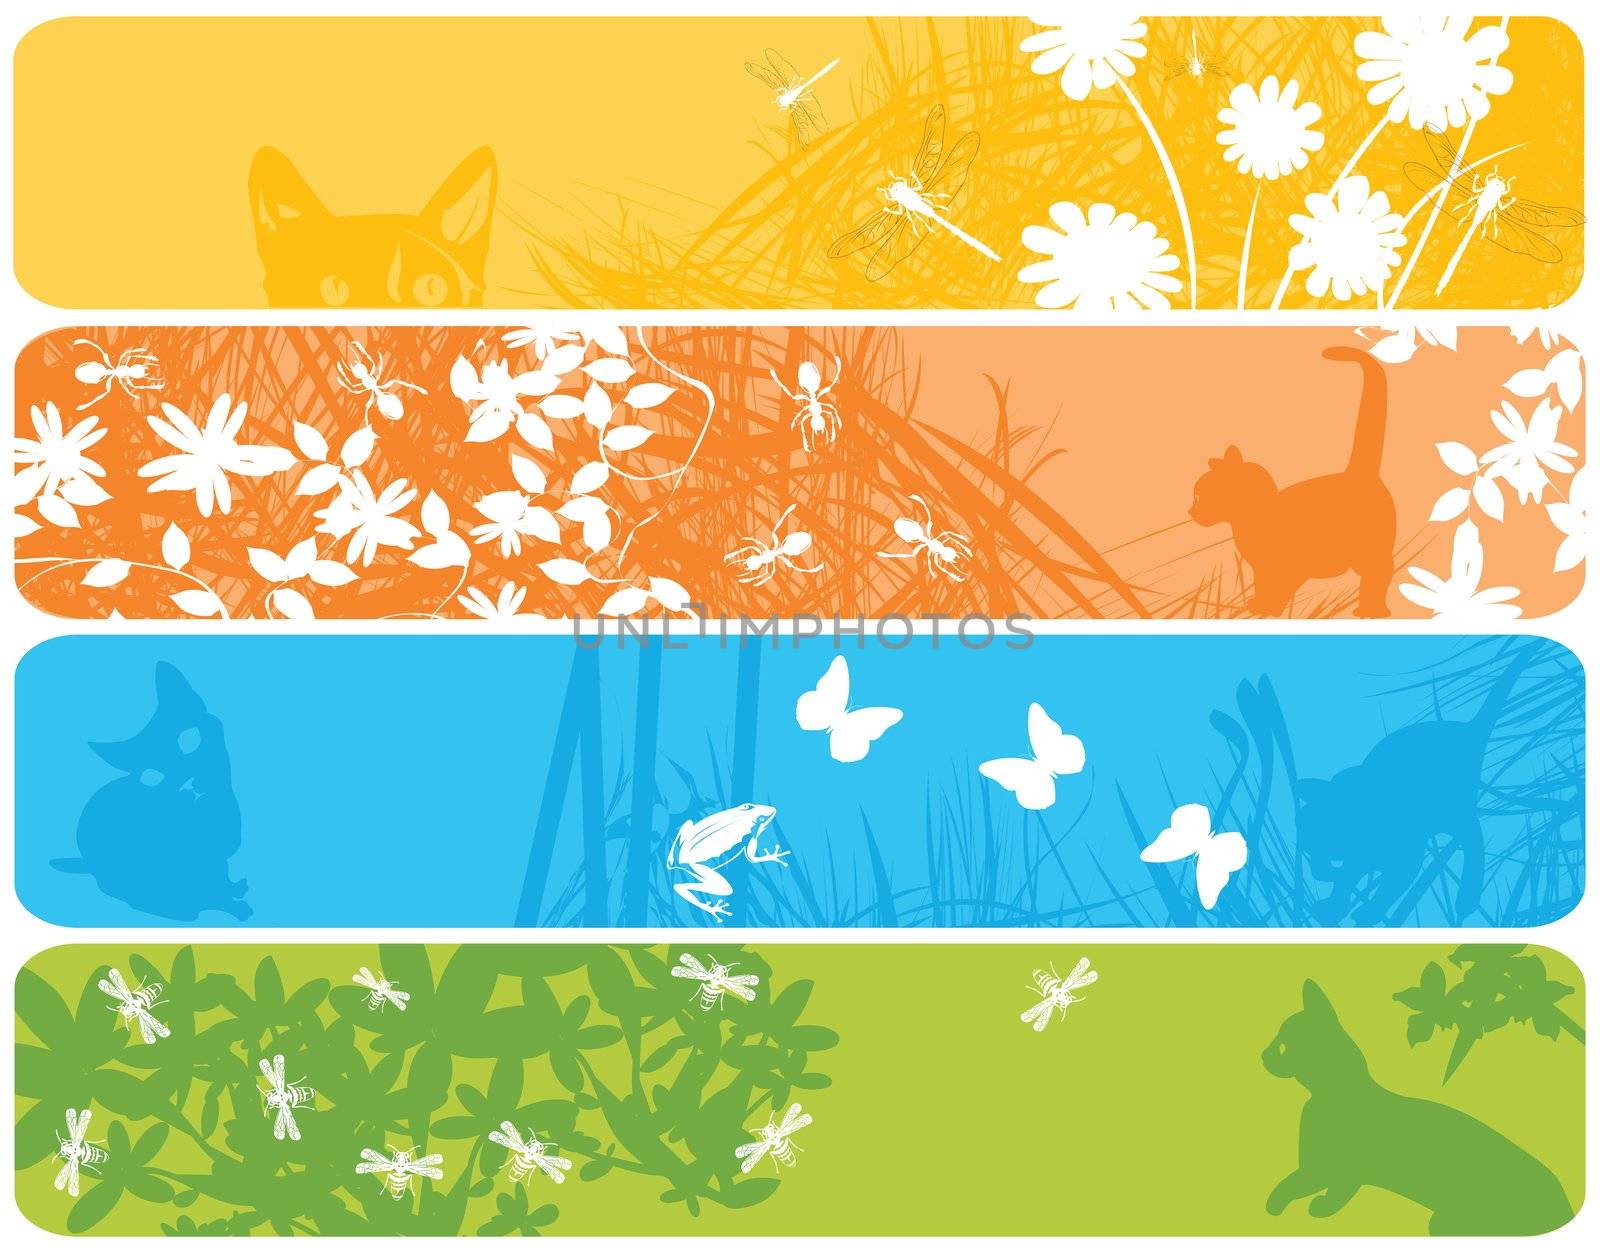 Web banners with spring theme by Lirch